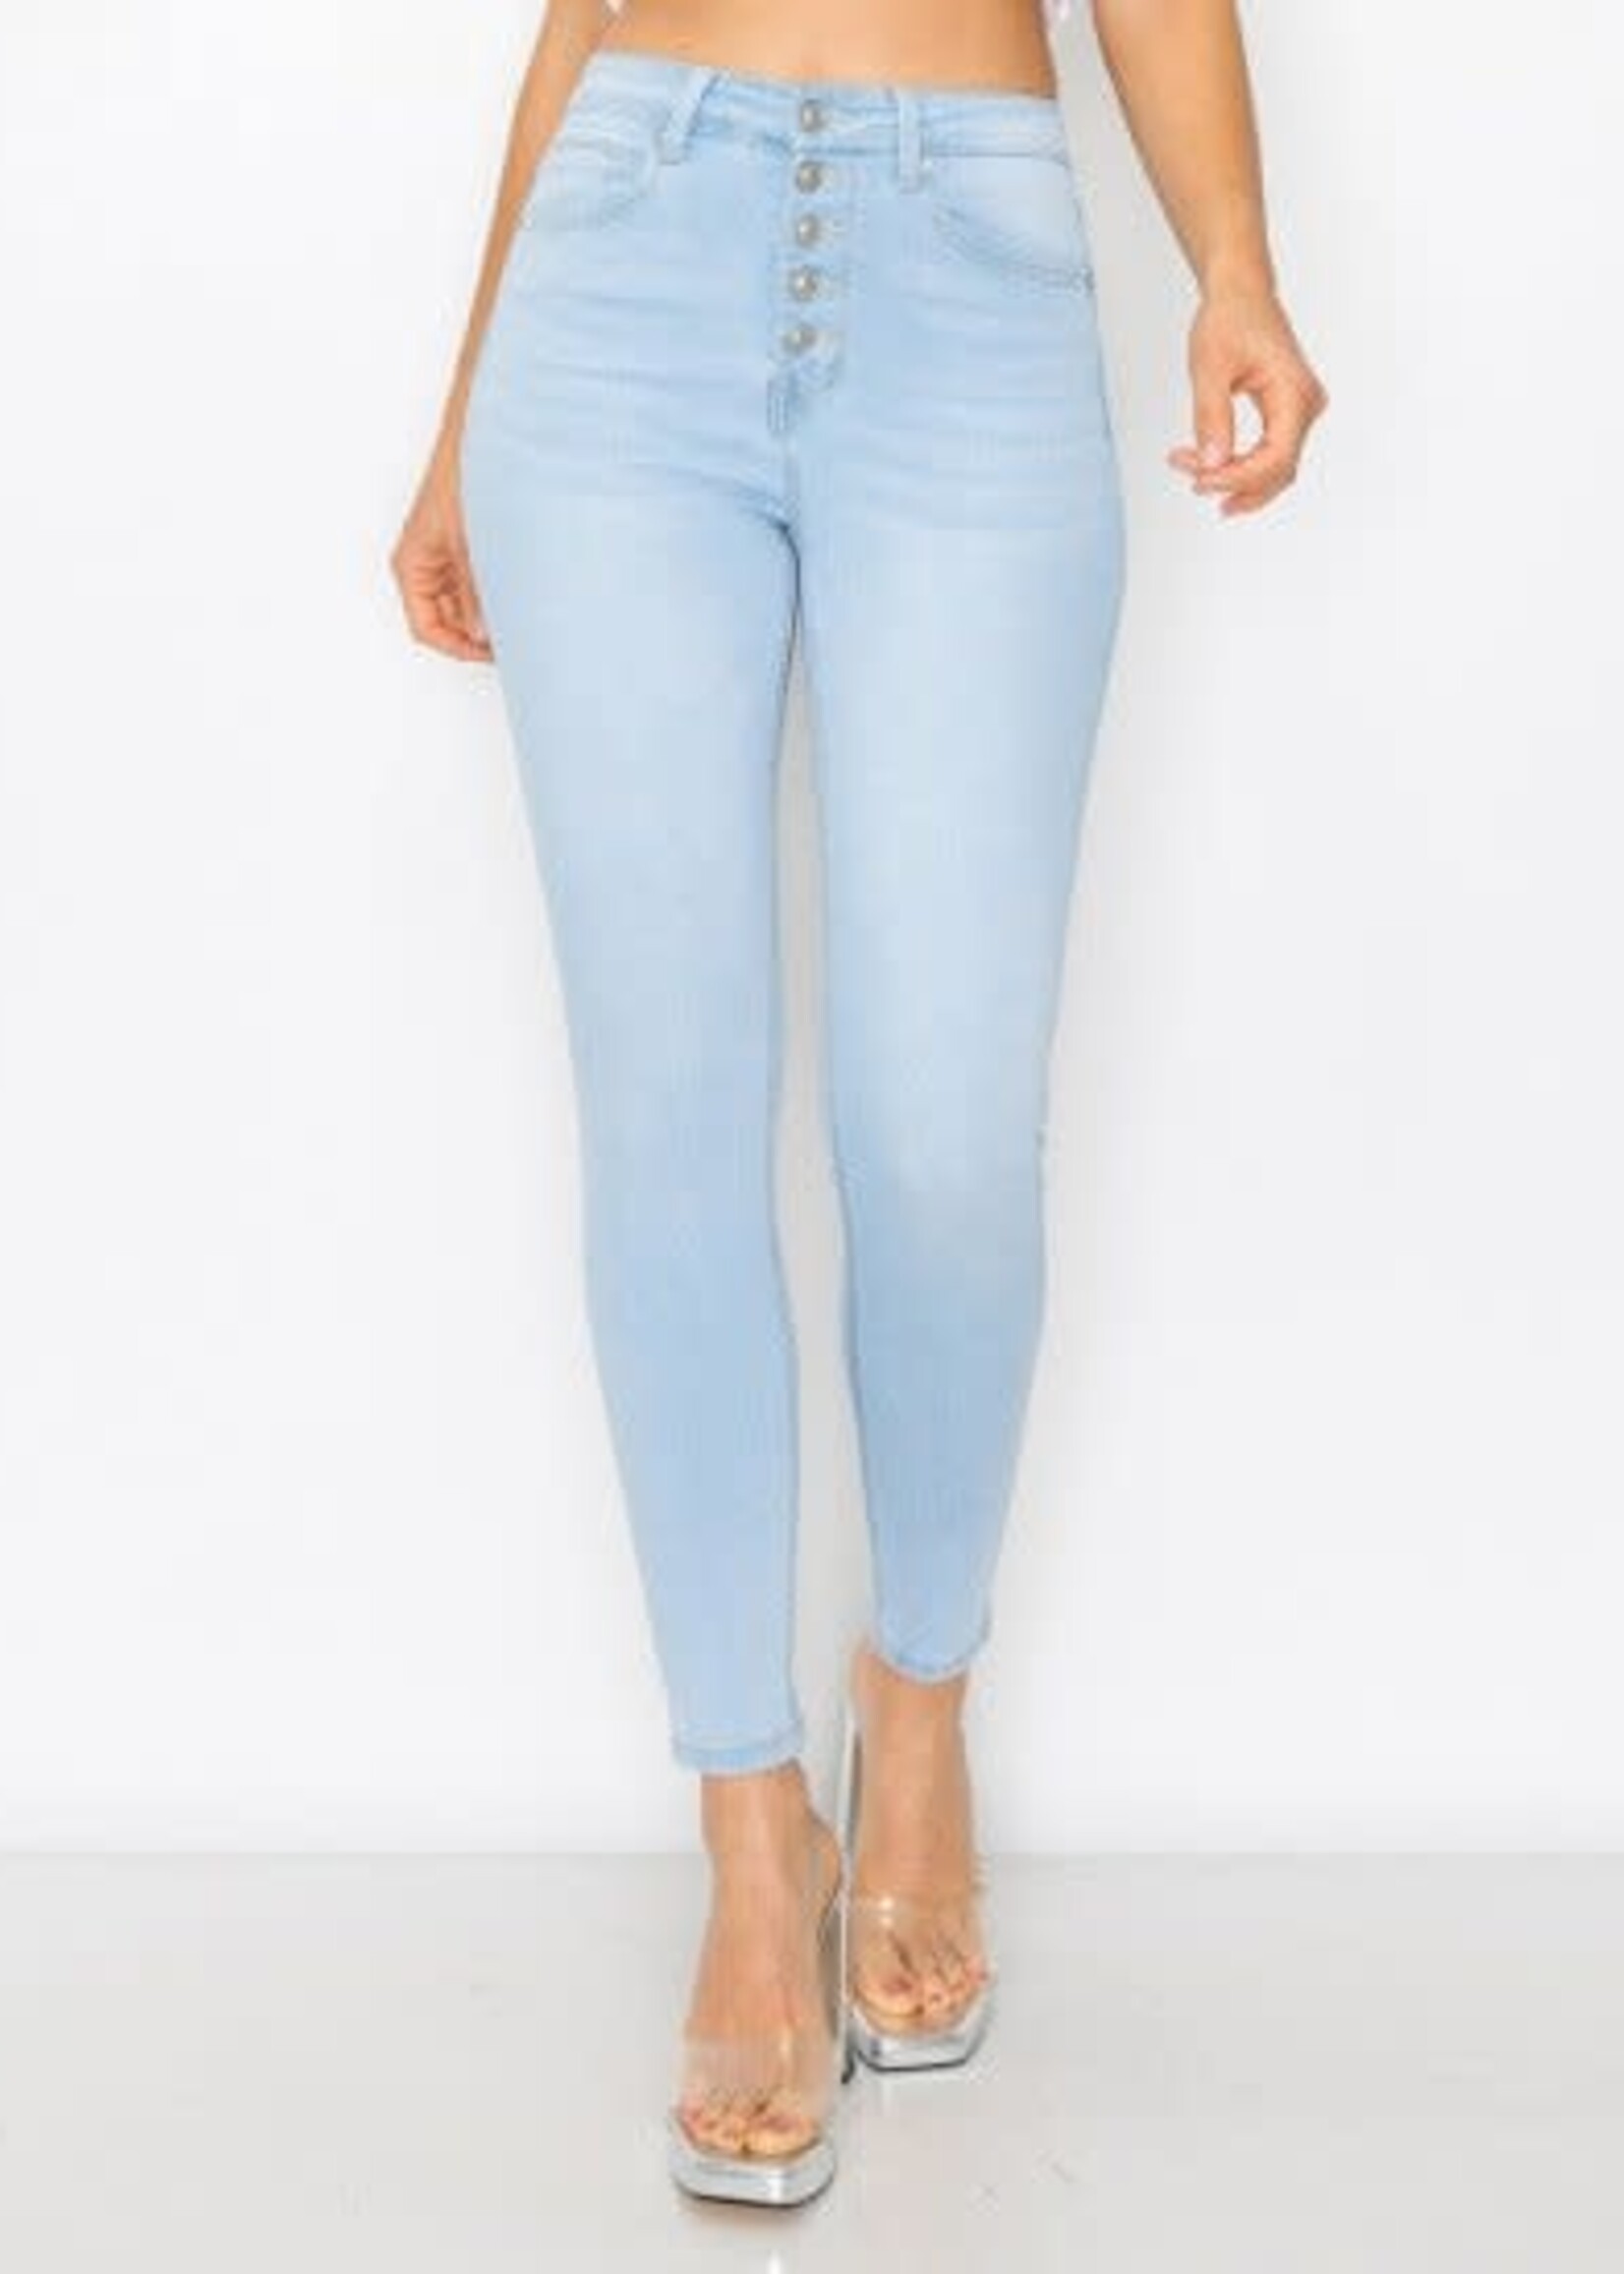 Skinny Jeans for Women - Buy Skinny Fit Jeans Online | ONLY